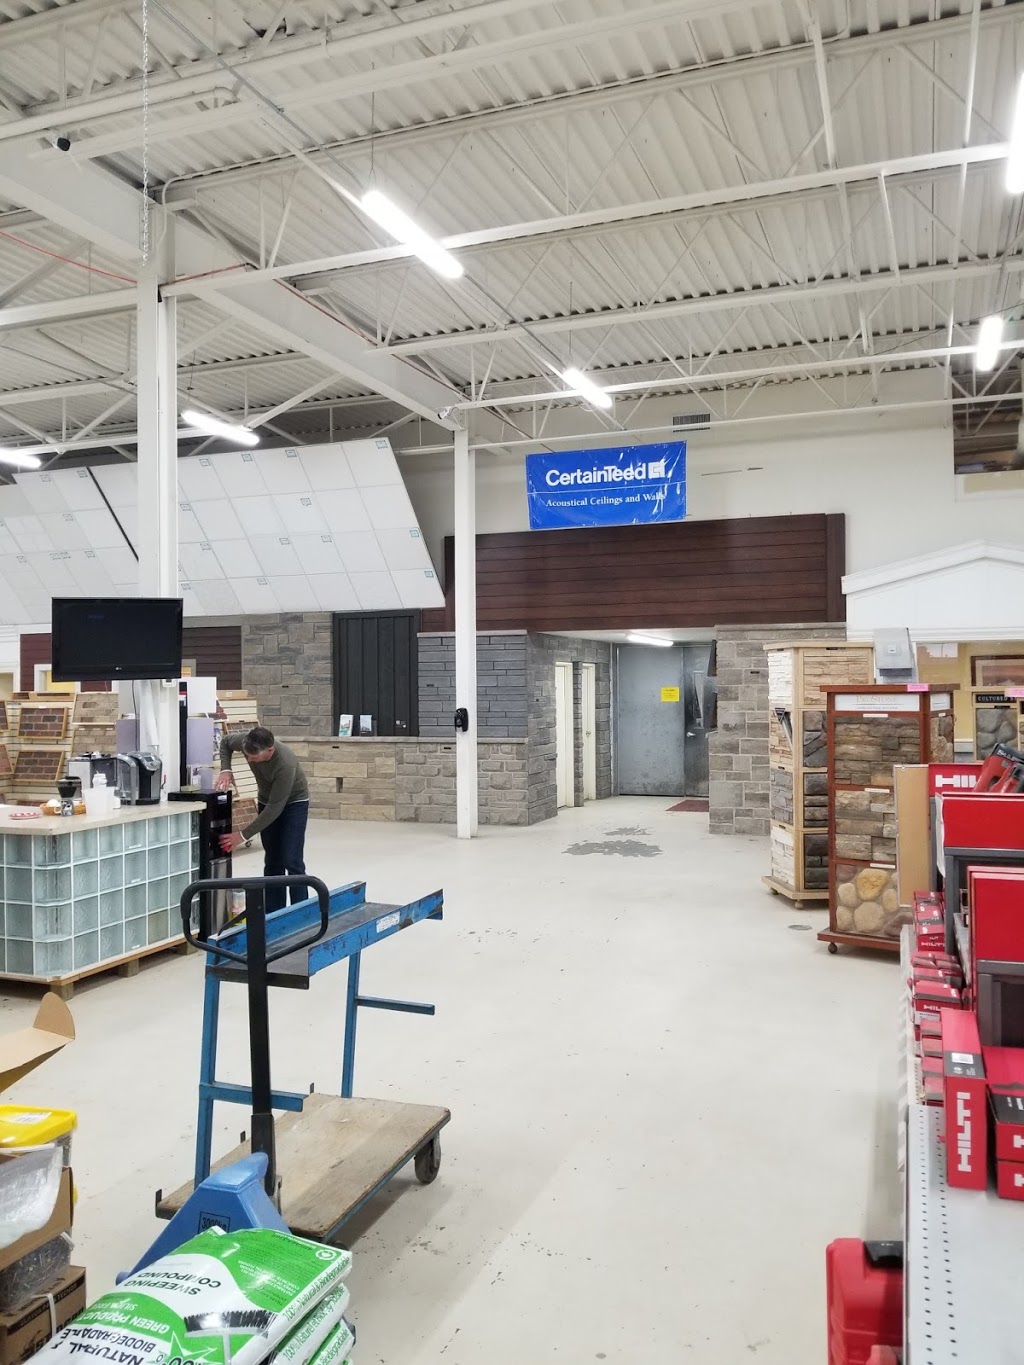 St Catharines Building Supplies Inc | 176 Bunting Rd, St. Catharines, ON L2M 3Y1, Canada | Phone: (905) 688-2111